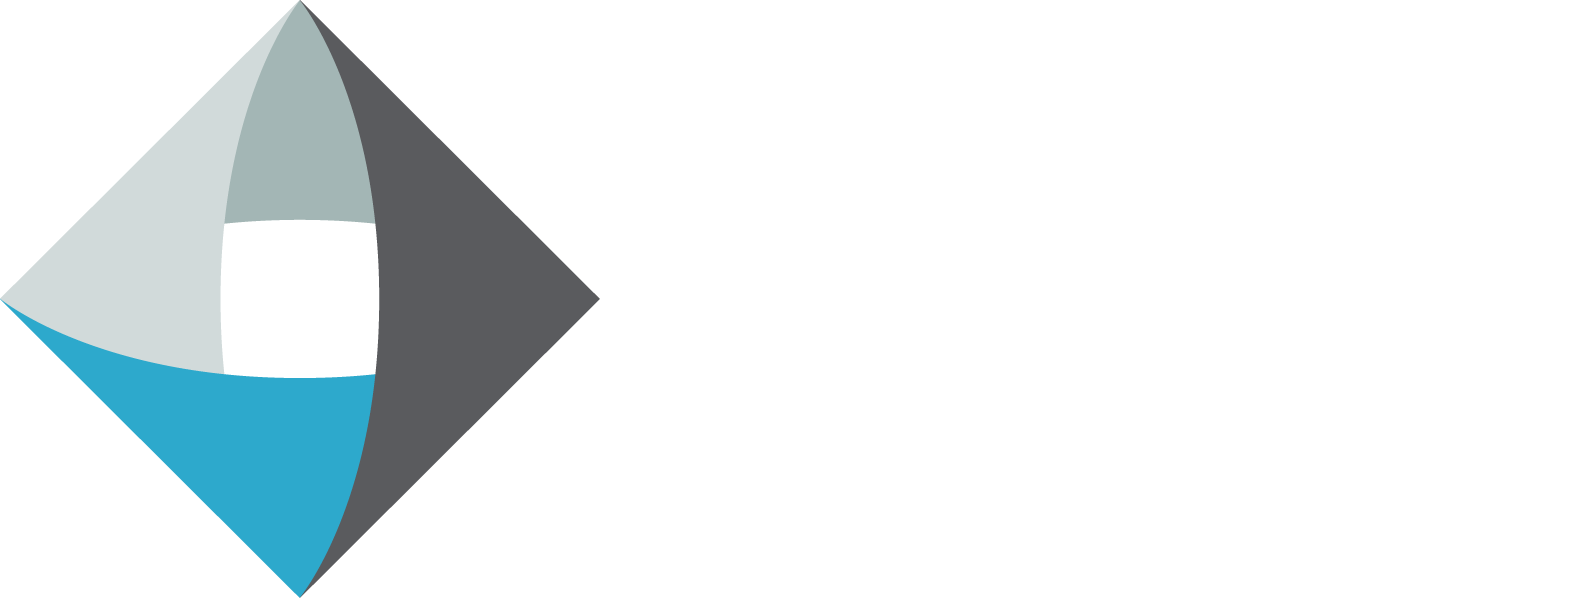 The Strategic Counsel